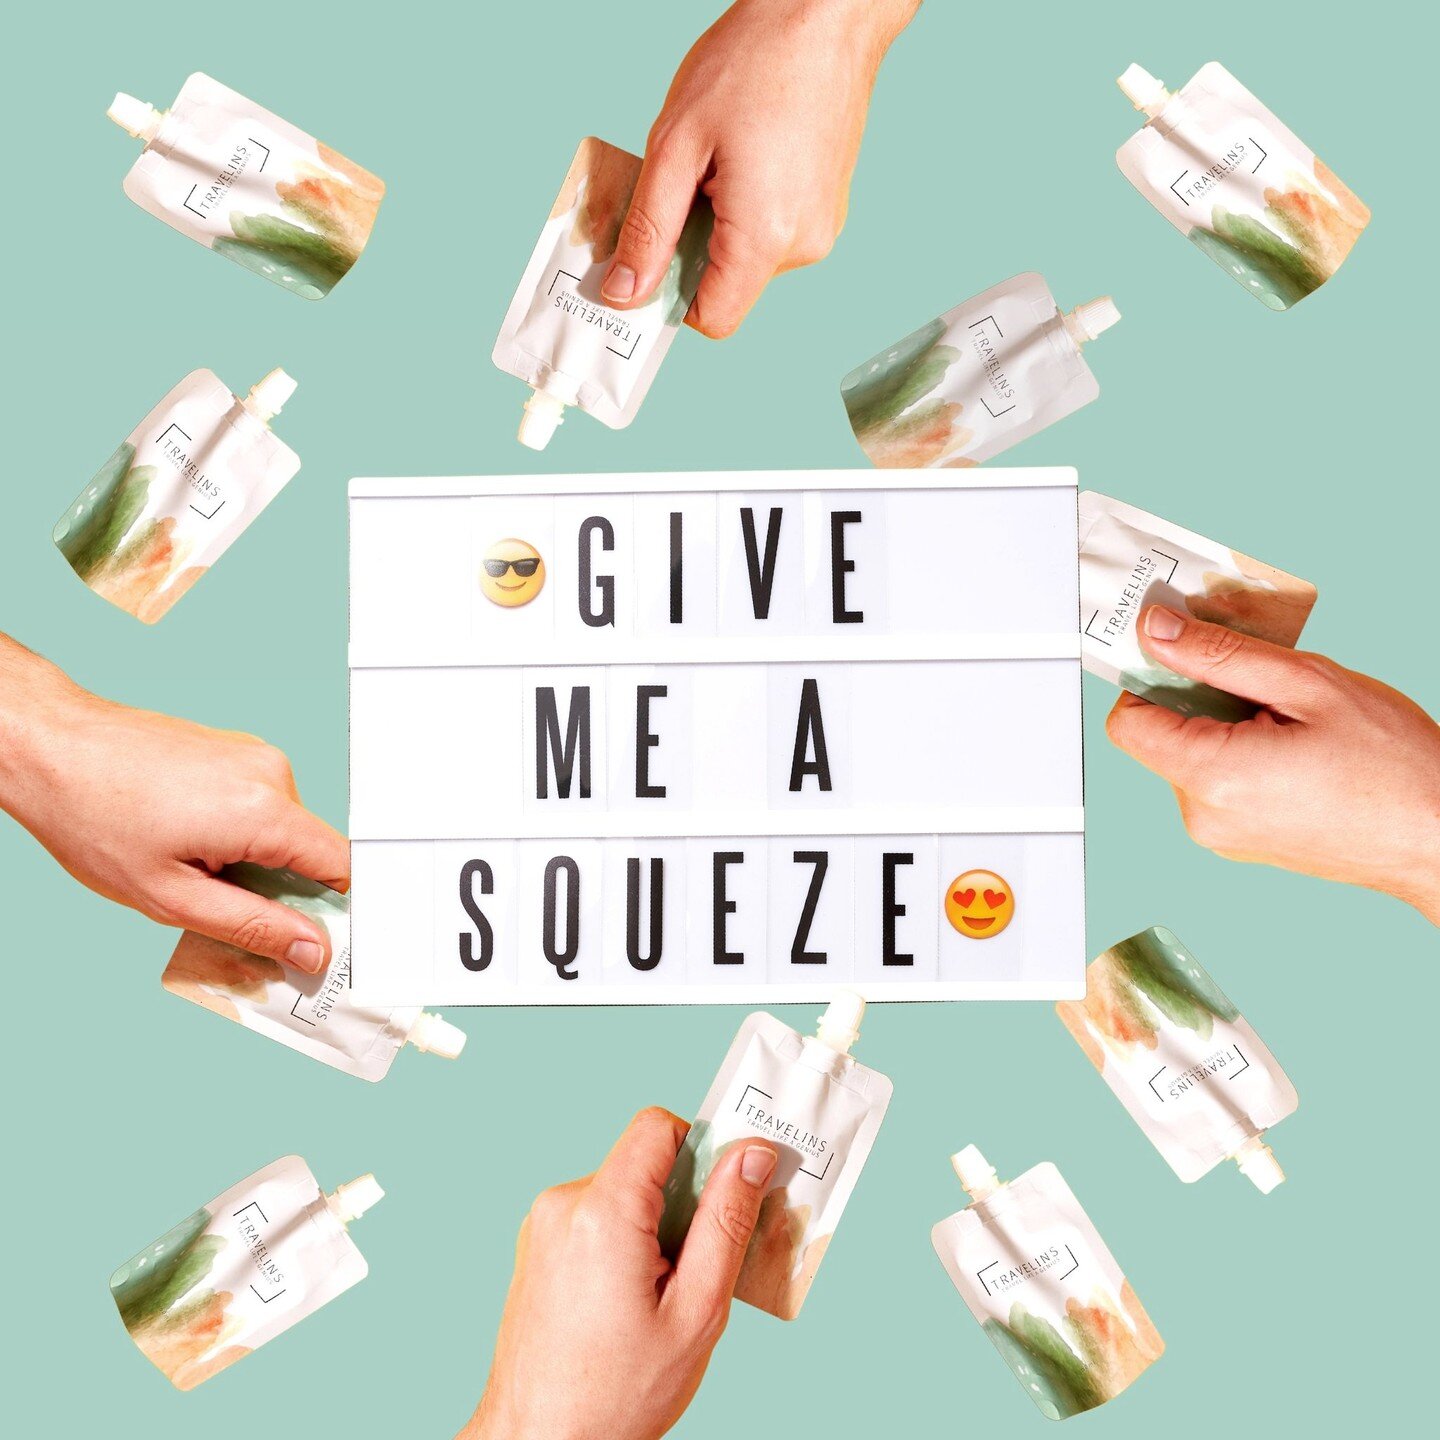 💞 TAKE IT SQUEEEEEEEZY

What do we love most about our TRAVELINS pouches? It's that they are squeezy. Unlike traditional #travelbottles, you can easily squeeze every last drop out. Honestly, nothing goes to waste with these bad boys. Take only as mu